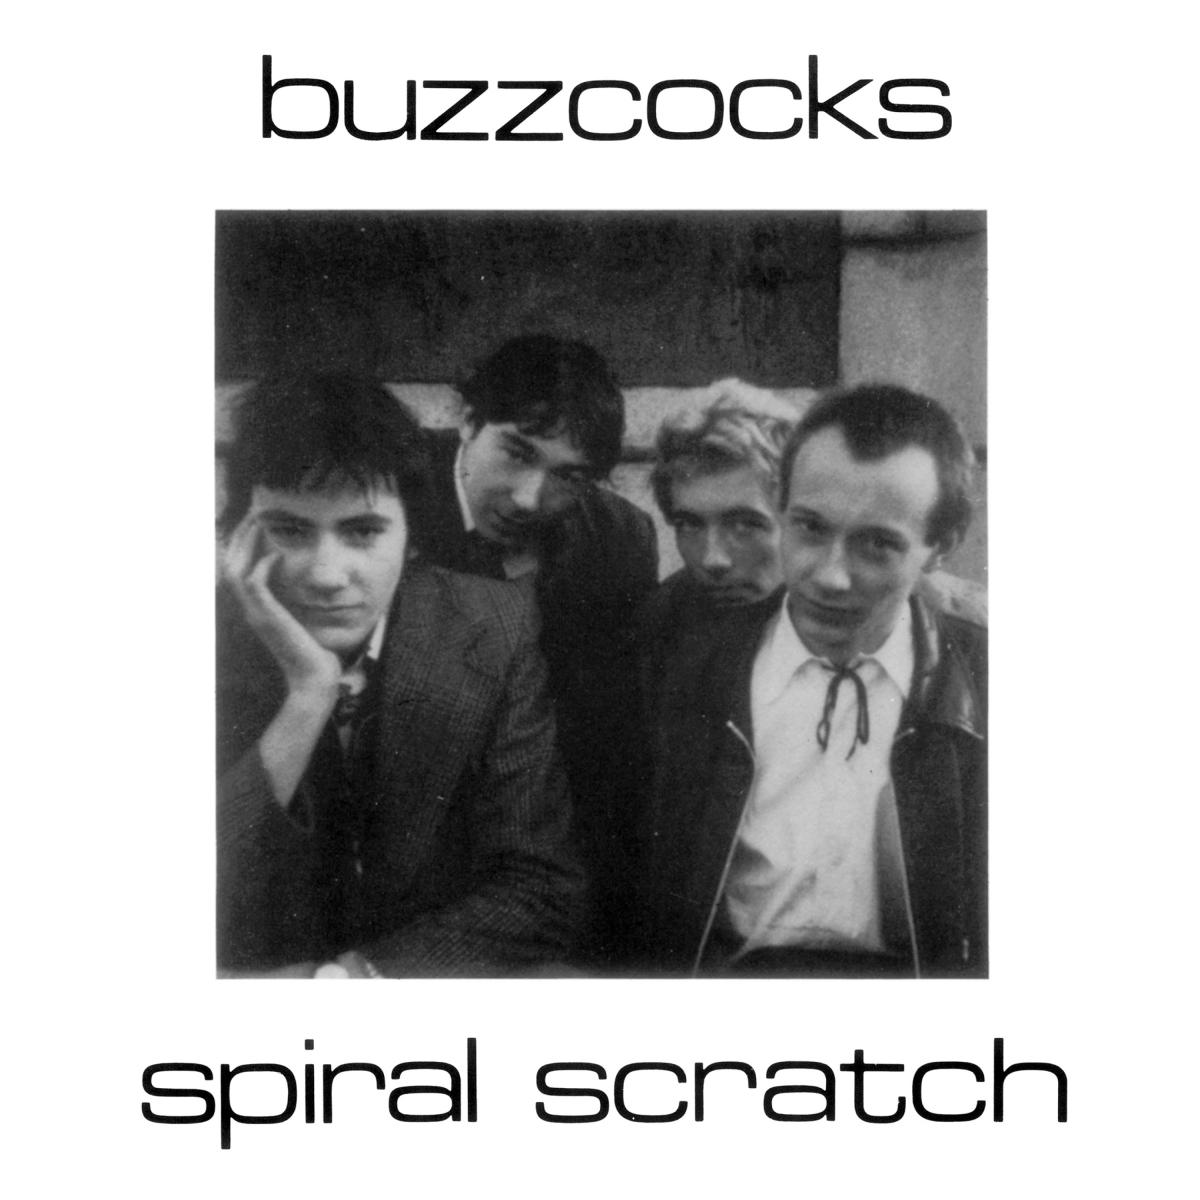 The Buzzcocks Spiral Scratch EP to be reissued on its 40th anniversar